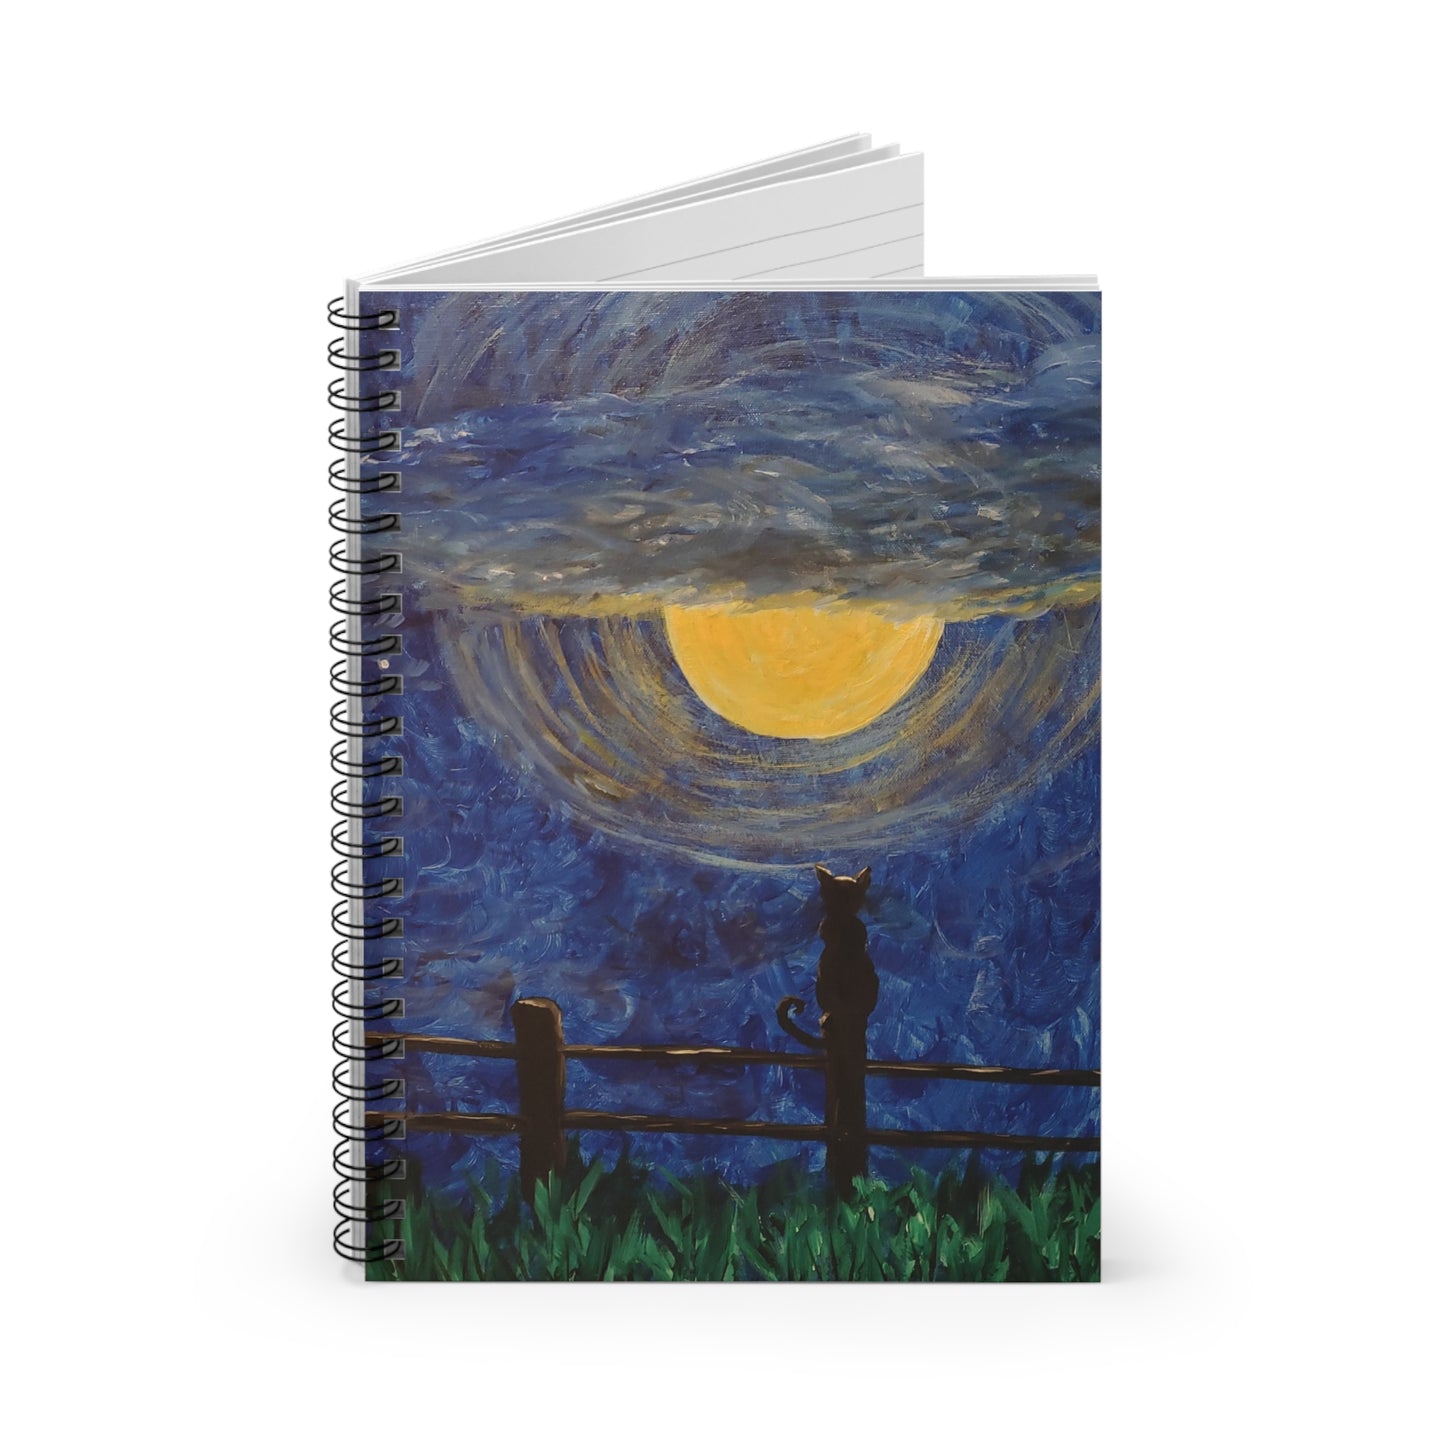 Moon Shadow Spiral Notebook - Ruled Line